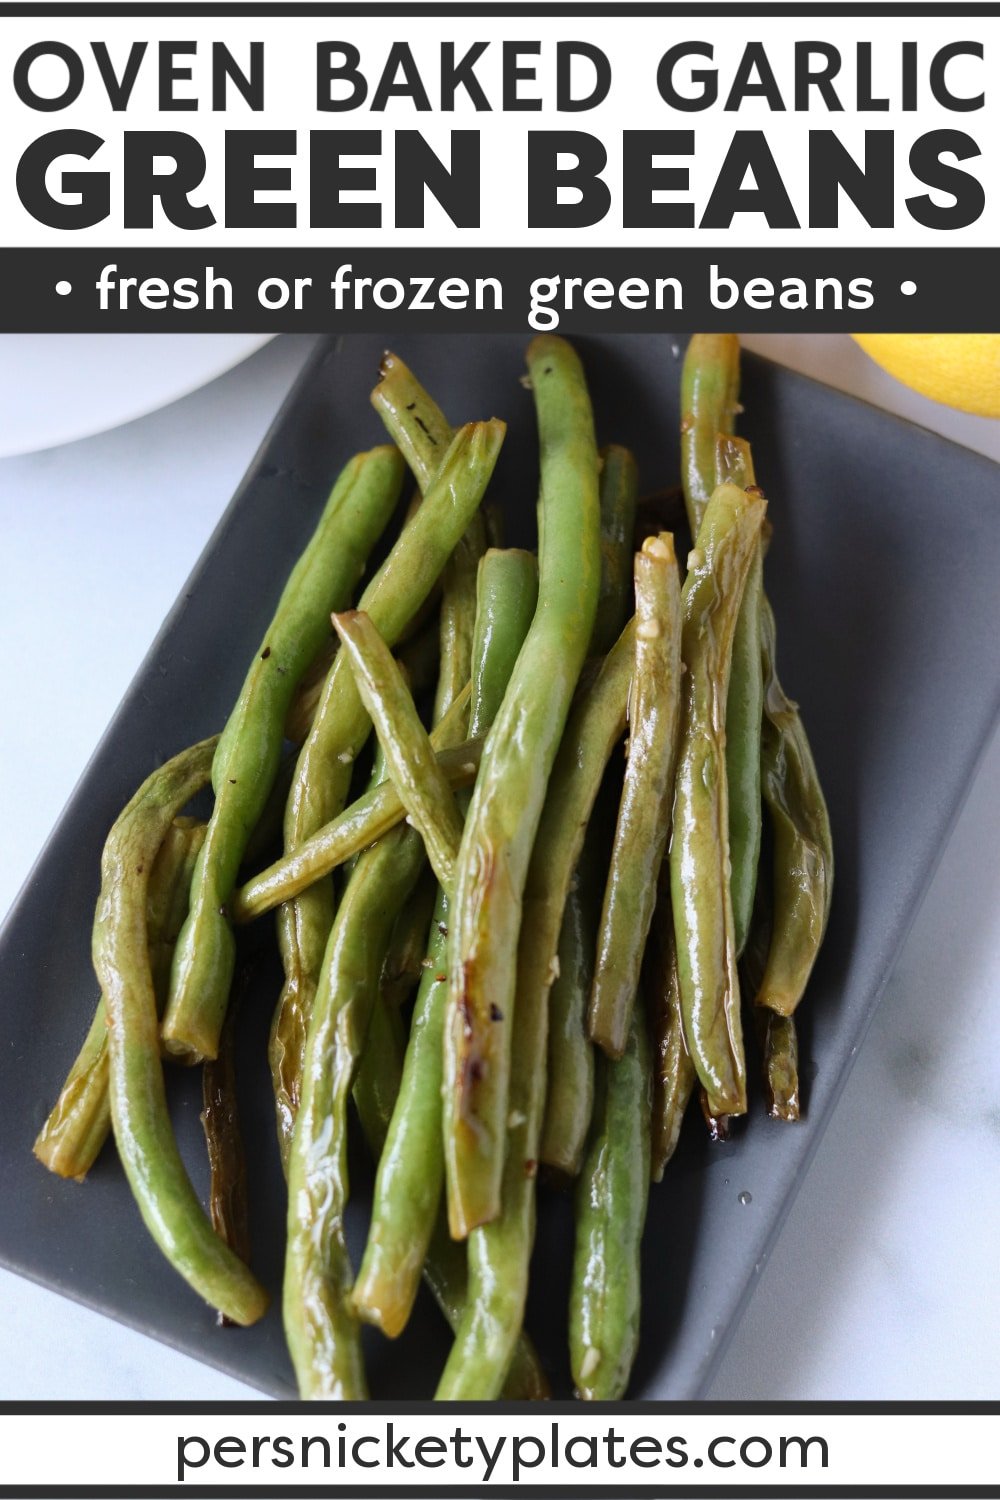 Oven baked green beans are a simple and healthy side dish I can never stop eating! With only five ingredients and just 10 minutes of prep time, this side dish is easy as it is versatile. It pairs well with just about anything! | www.persnicketyplates.com